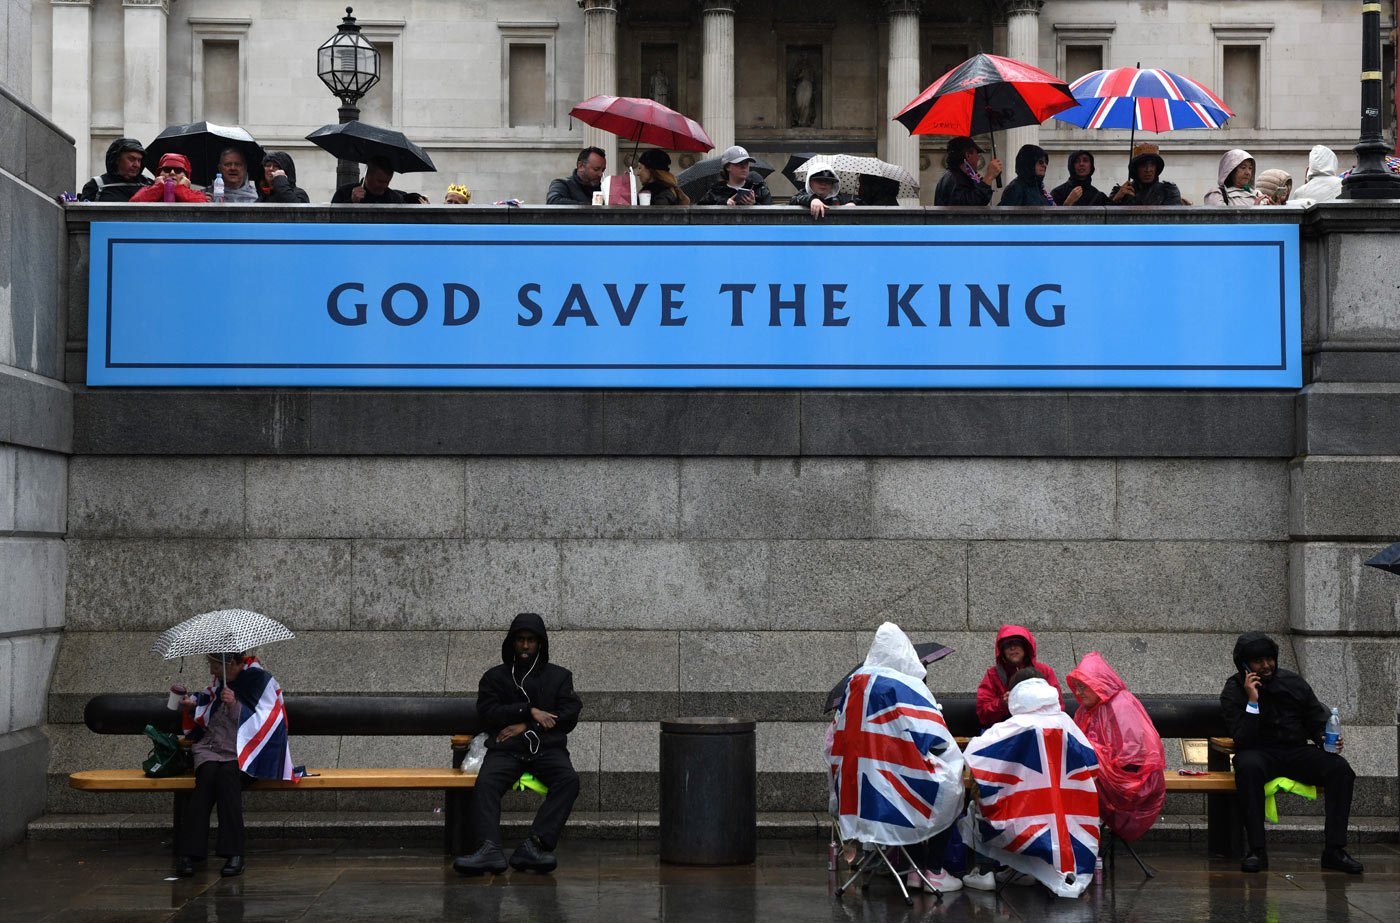 Rain-soaked members of the public take a break during celebrations for the coronation of King Charles III